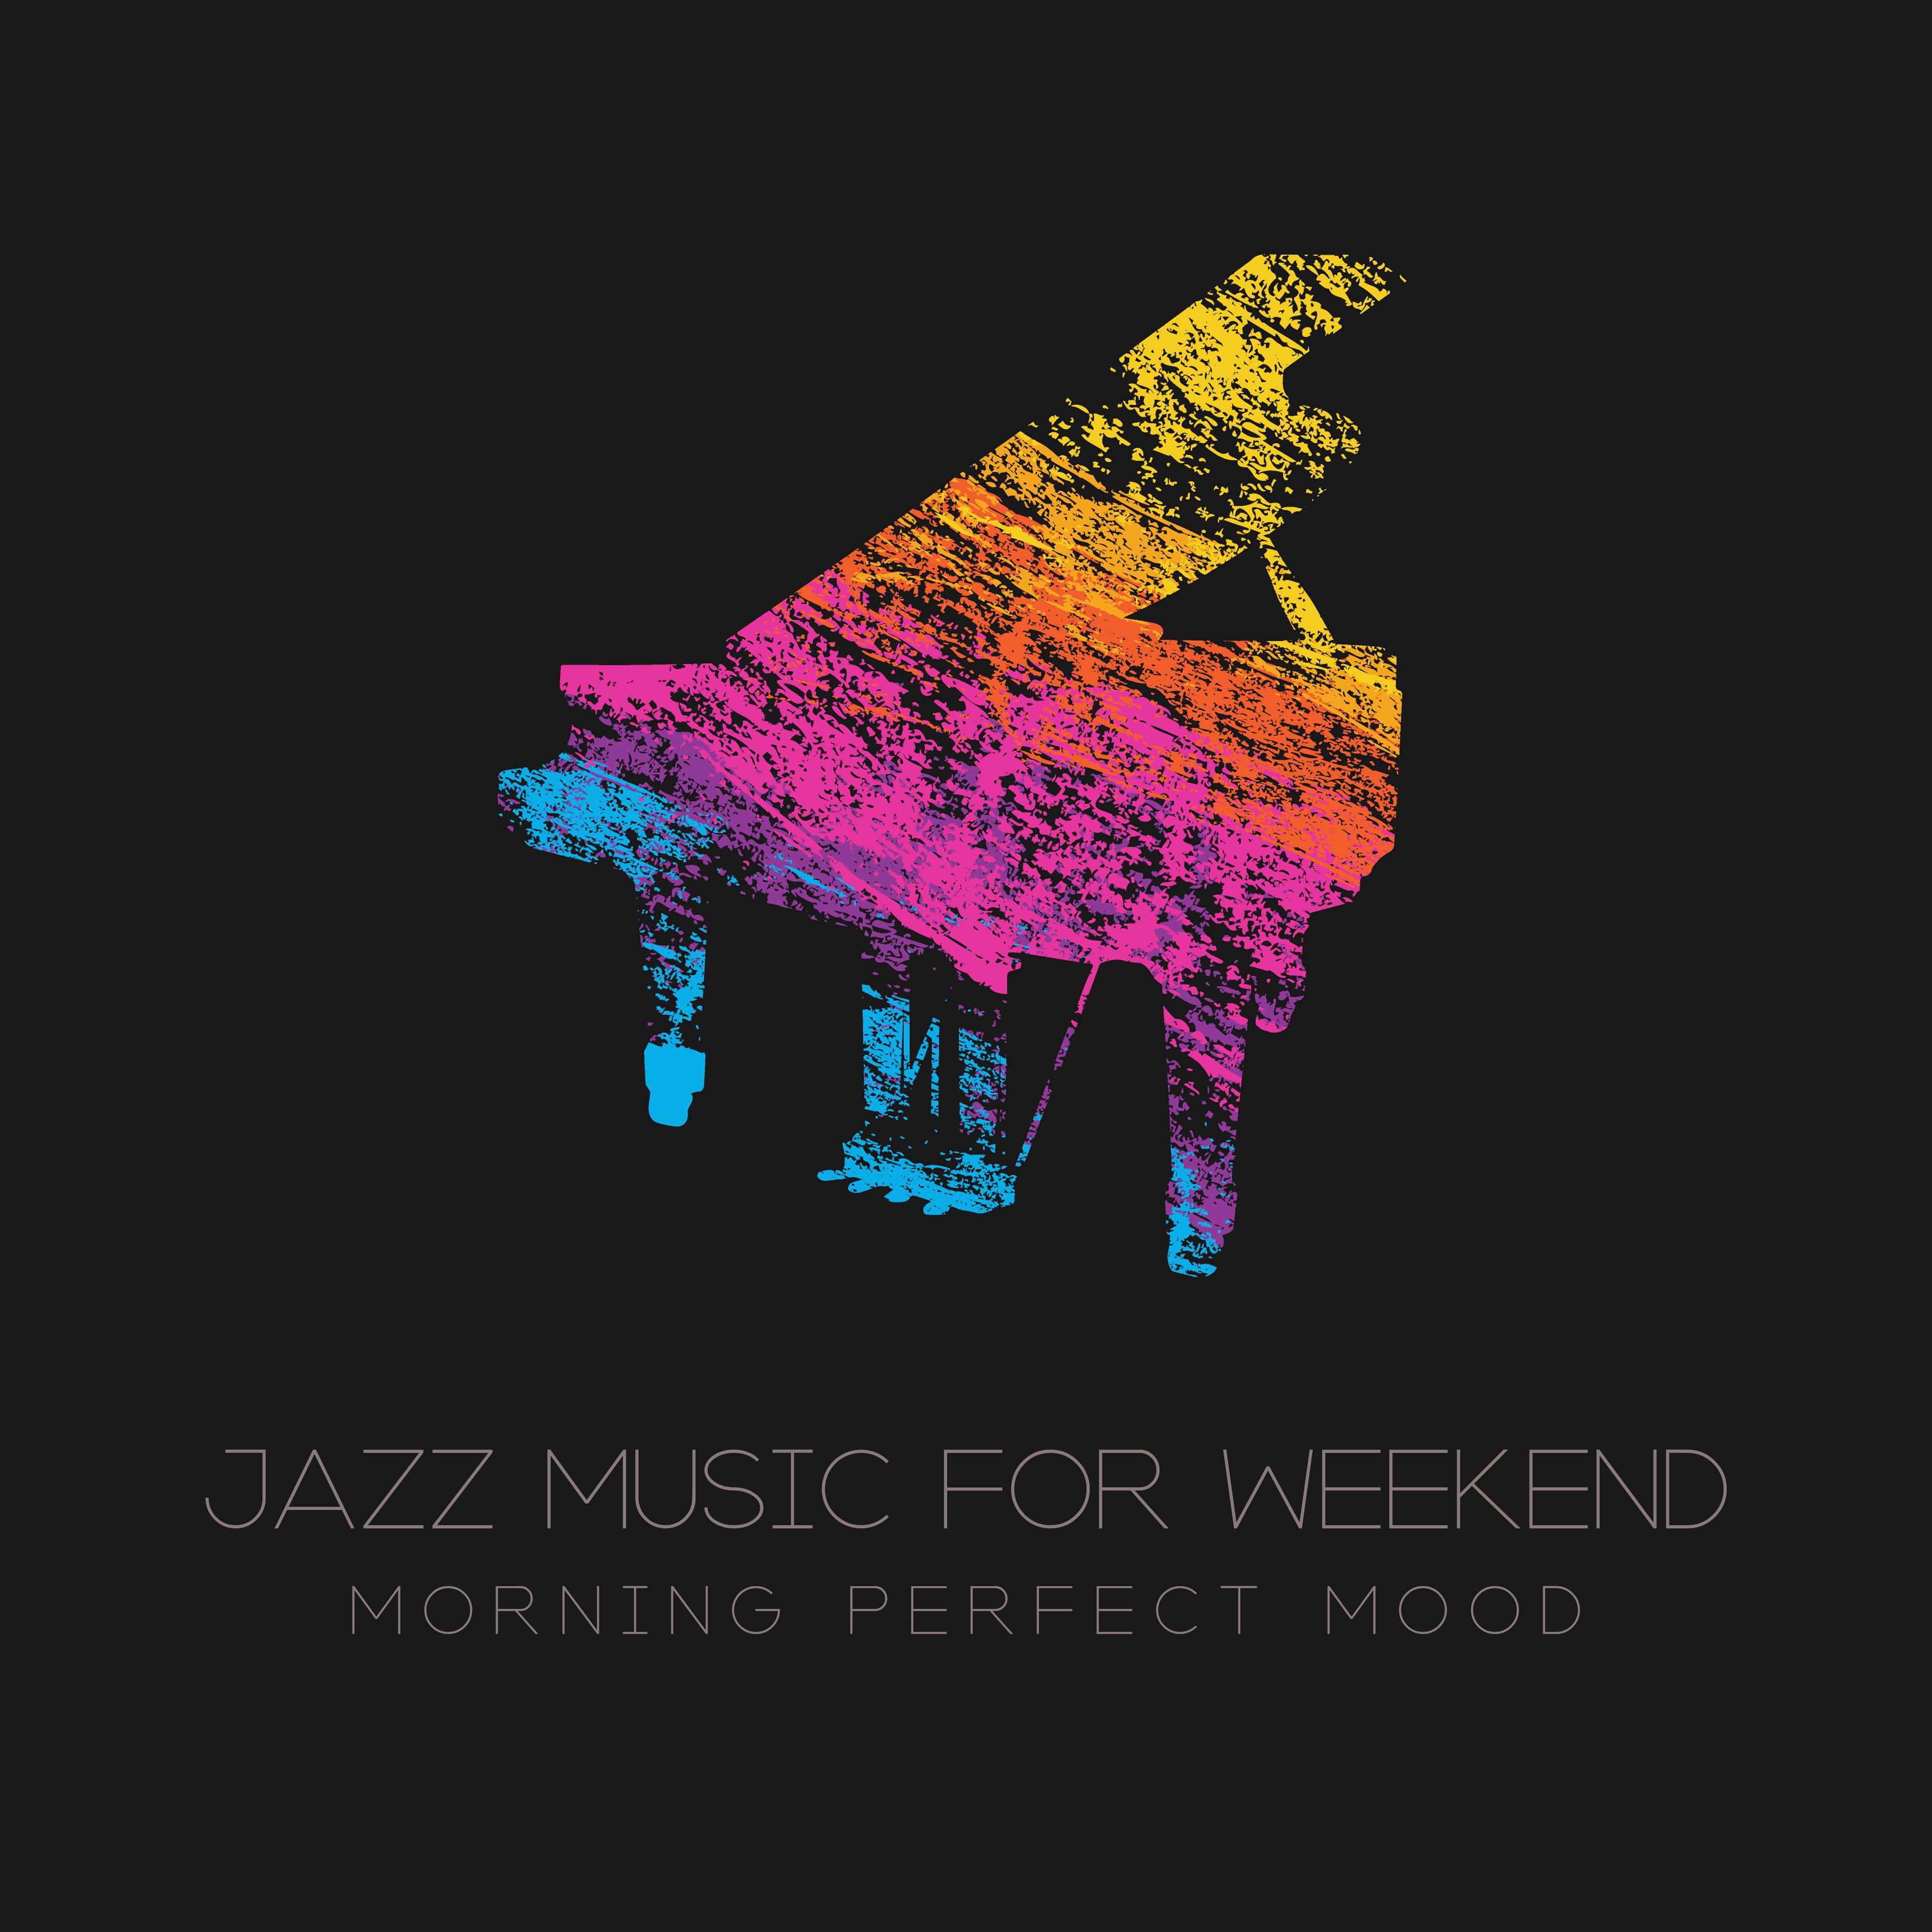 Jazz Music for Weekend Morning Perfect Mood